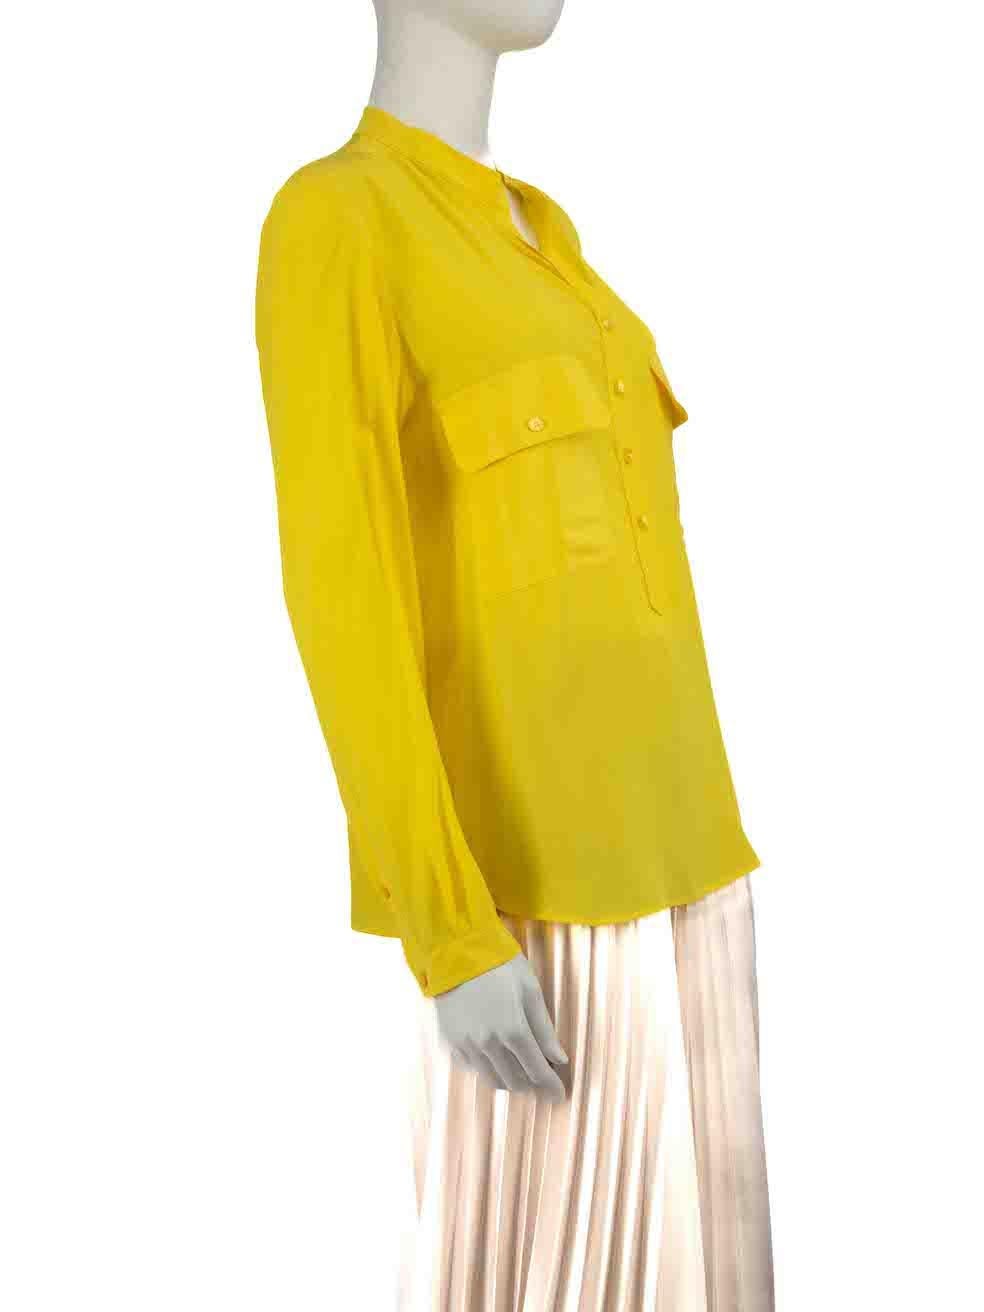 CONDITION is Very good. Minimal wear to blouse is evident. Minimal wear to the left sleeve cuff with a small mark on this used Stella McCartney designer resale item.
 
Details
Yellow
Silk
Blouse
Long sleeves
Button up fastening
Buttoned cuffs
2x